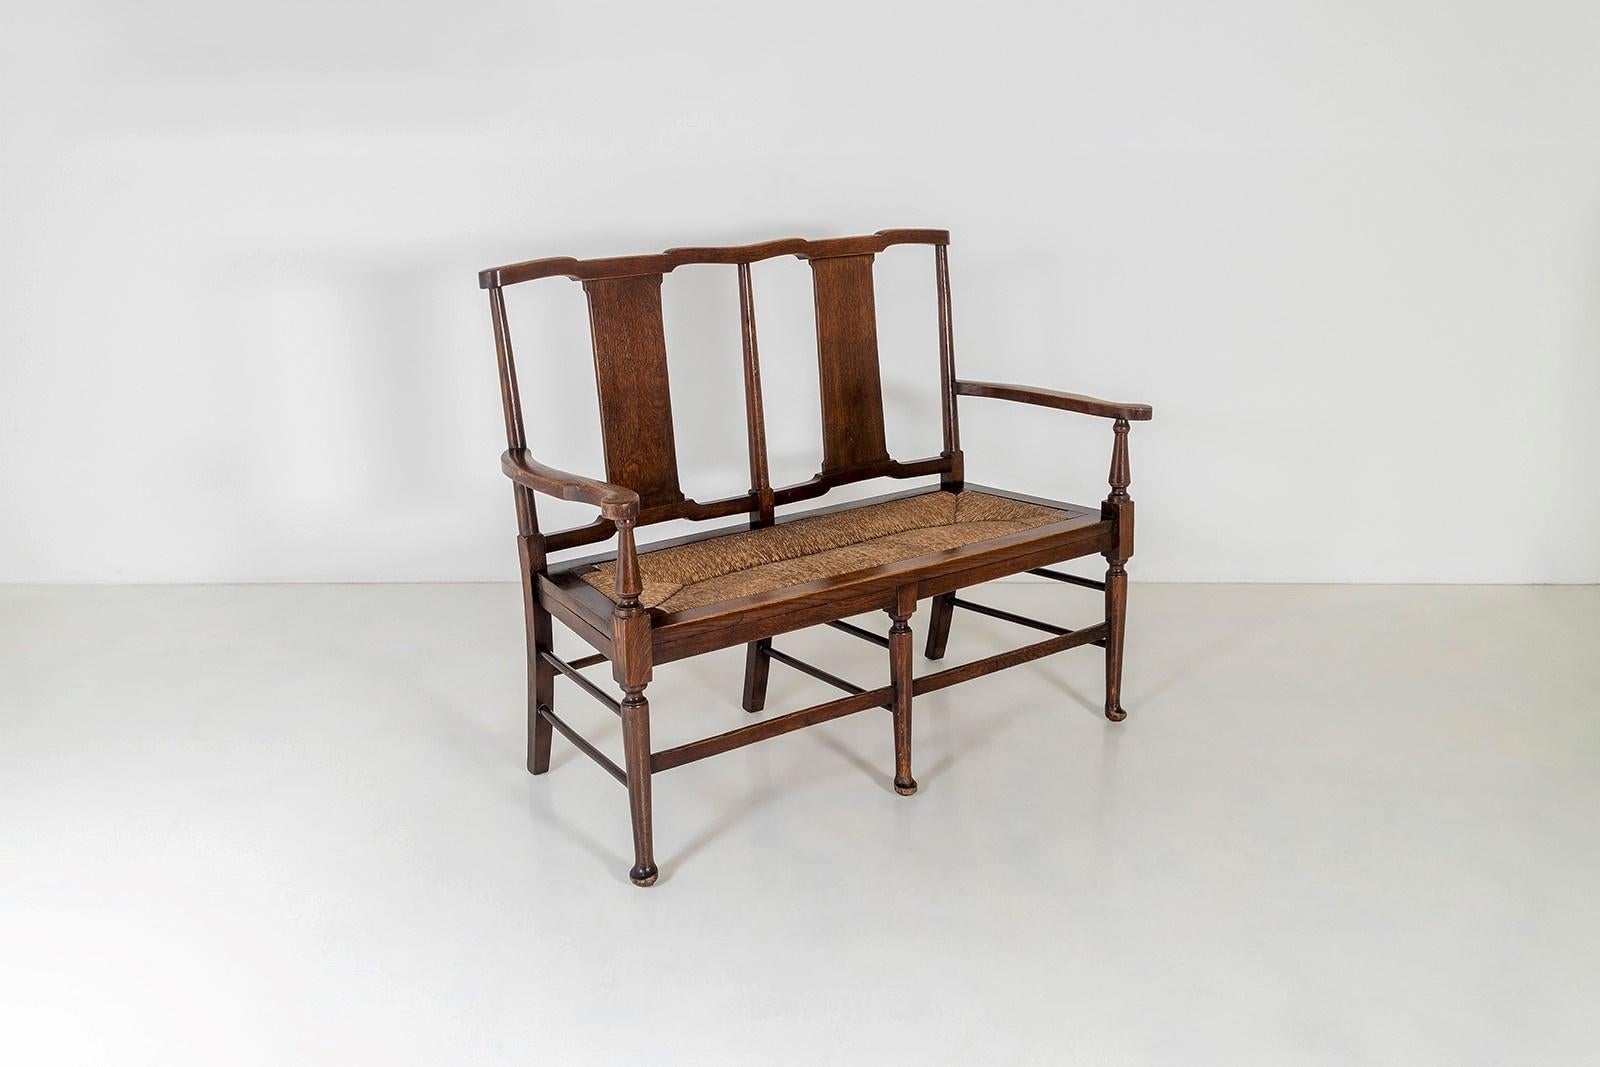 A very original, 19th century Oak two seater bench seat with original rush seat.
Dating to the Arts & Craft movement, this wonderful example is in the manner of Richard Norman Shaw for William Morris & Co.
The bench seat is a generous two seater,